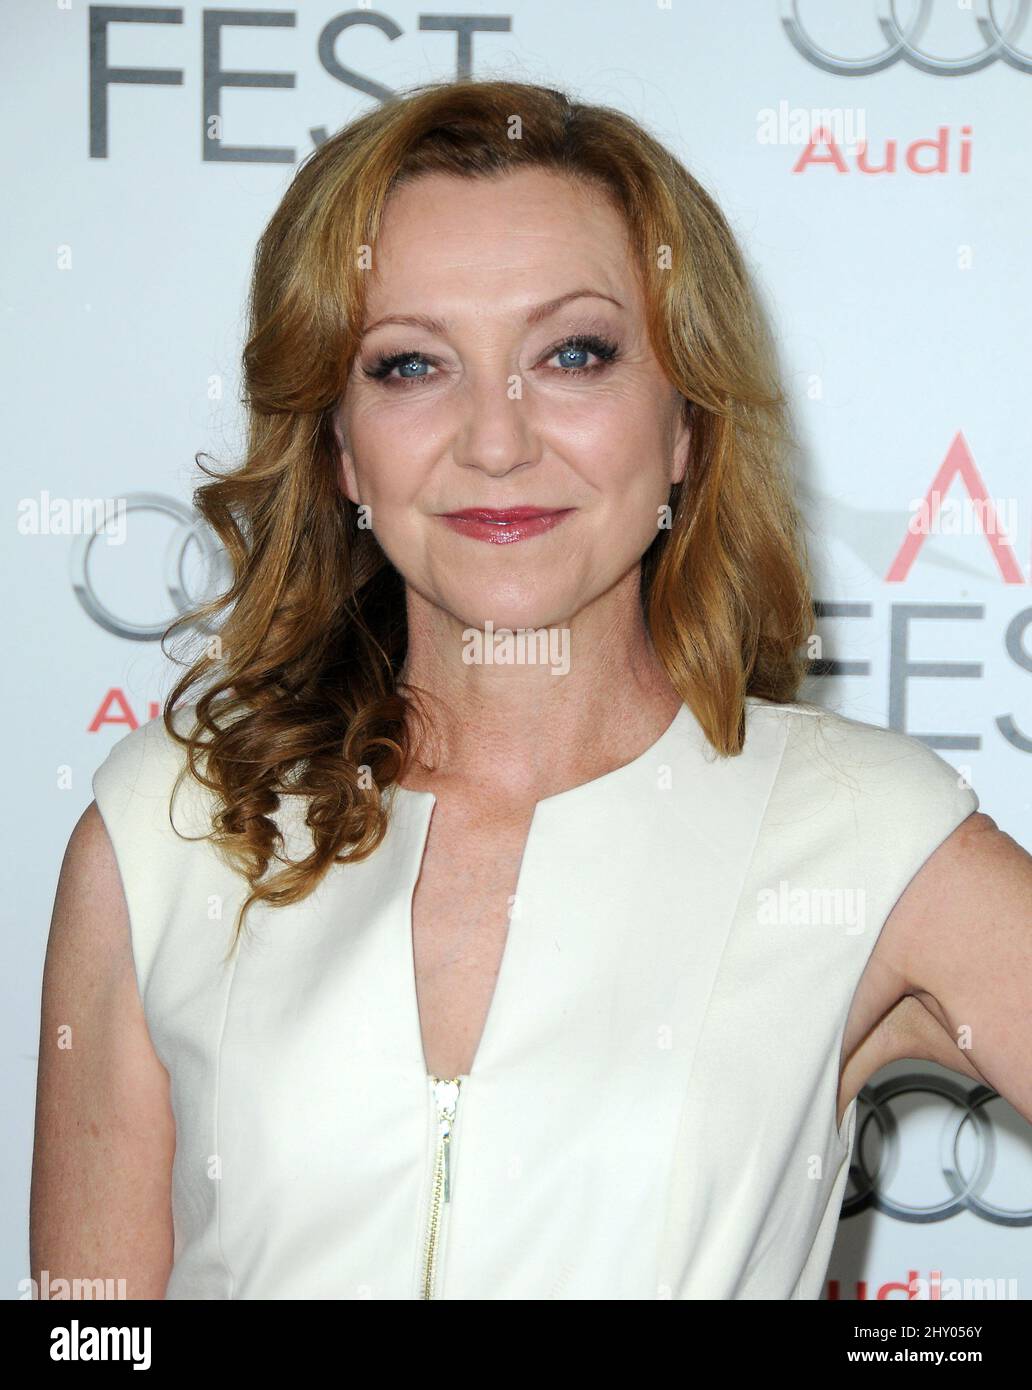 Julie White attends the premiere of 'Lincoln' at the closing night gala of AFI FEST 2012 held at Grauman's Chinese Theatre, Los Angeles. Stock Photo